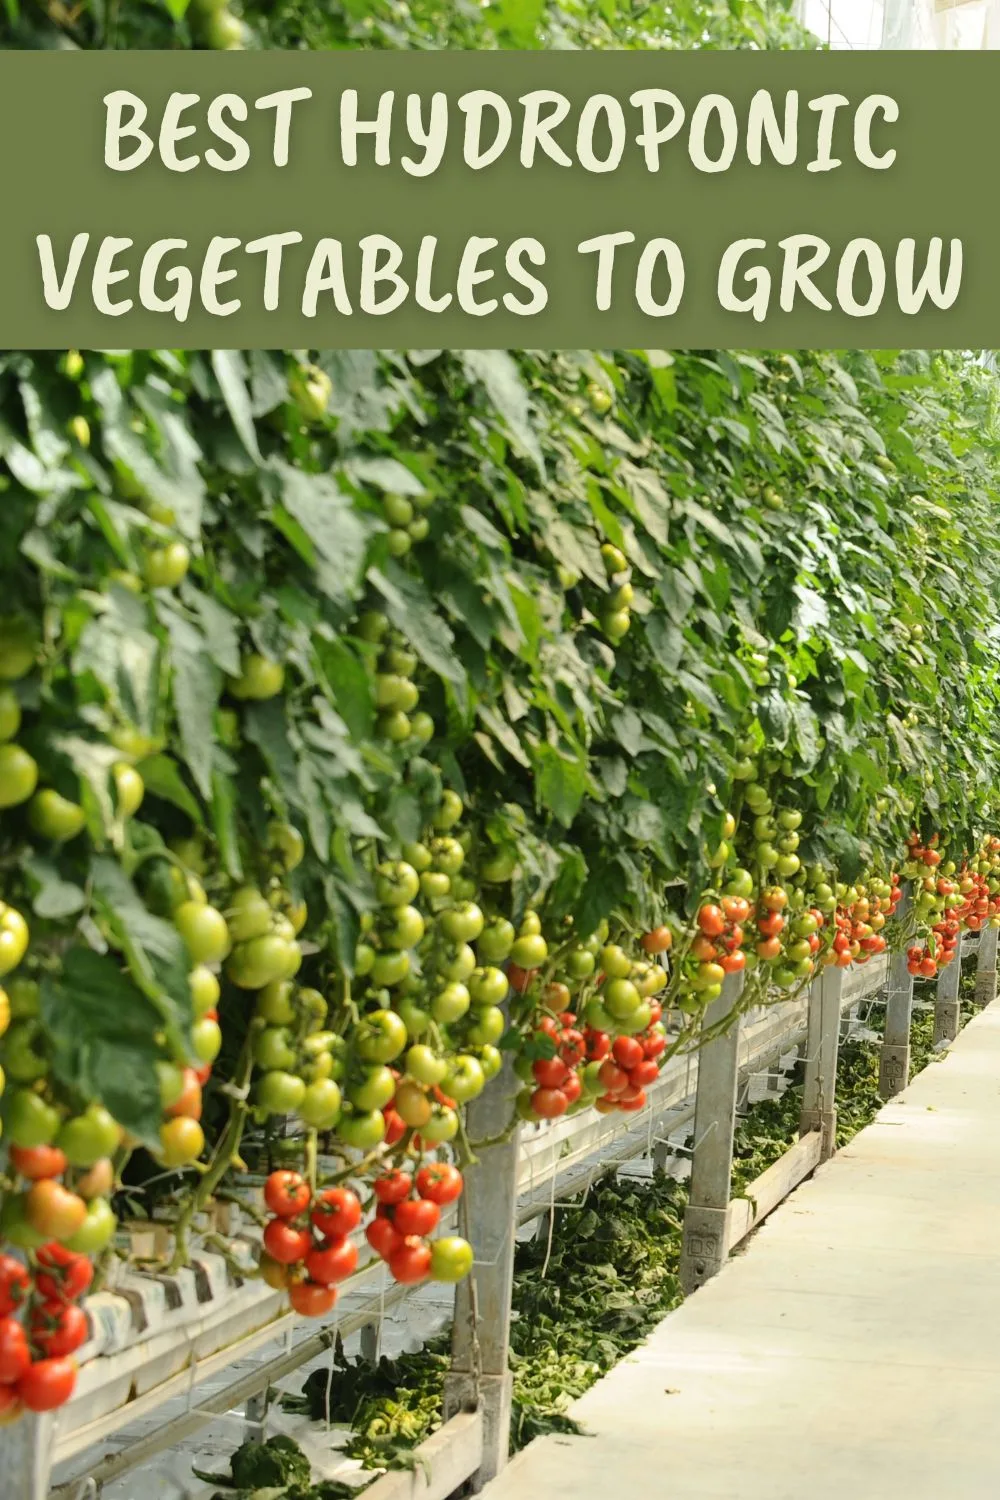 Best hydroponic vegetables to grow.